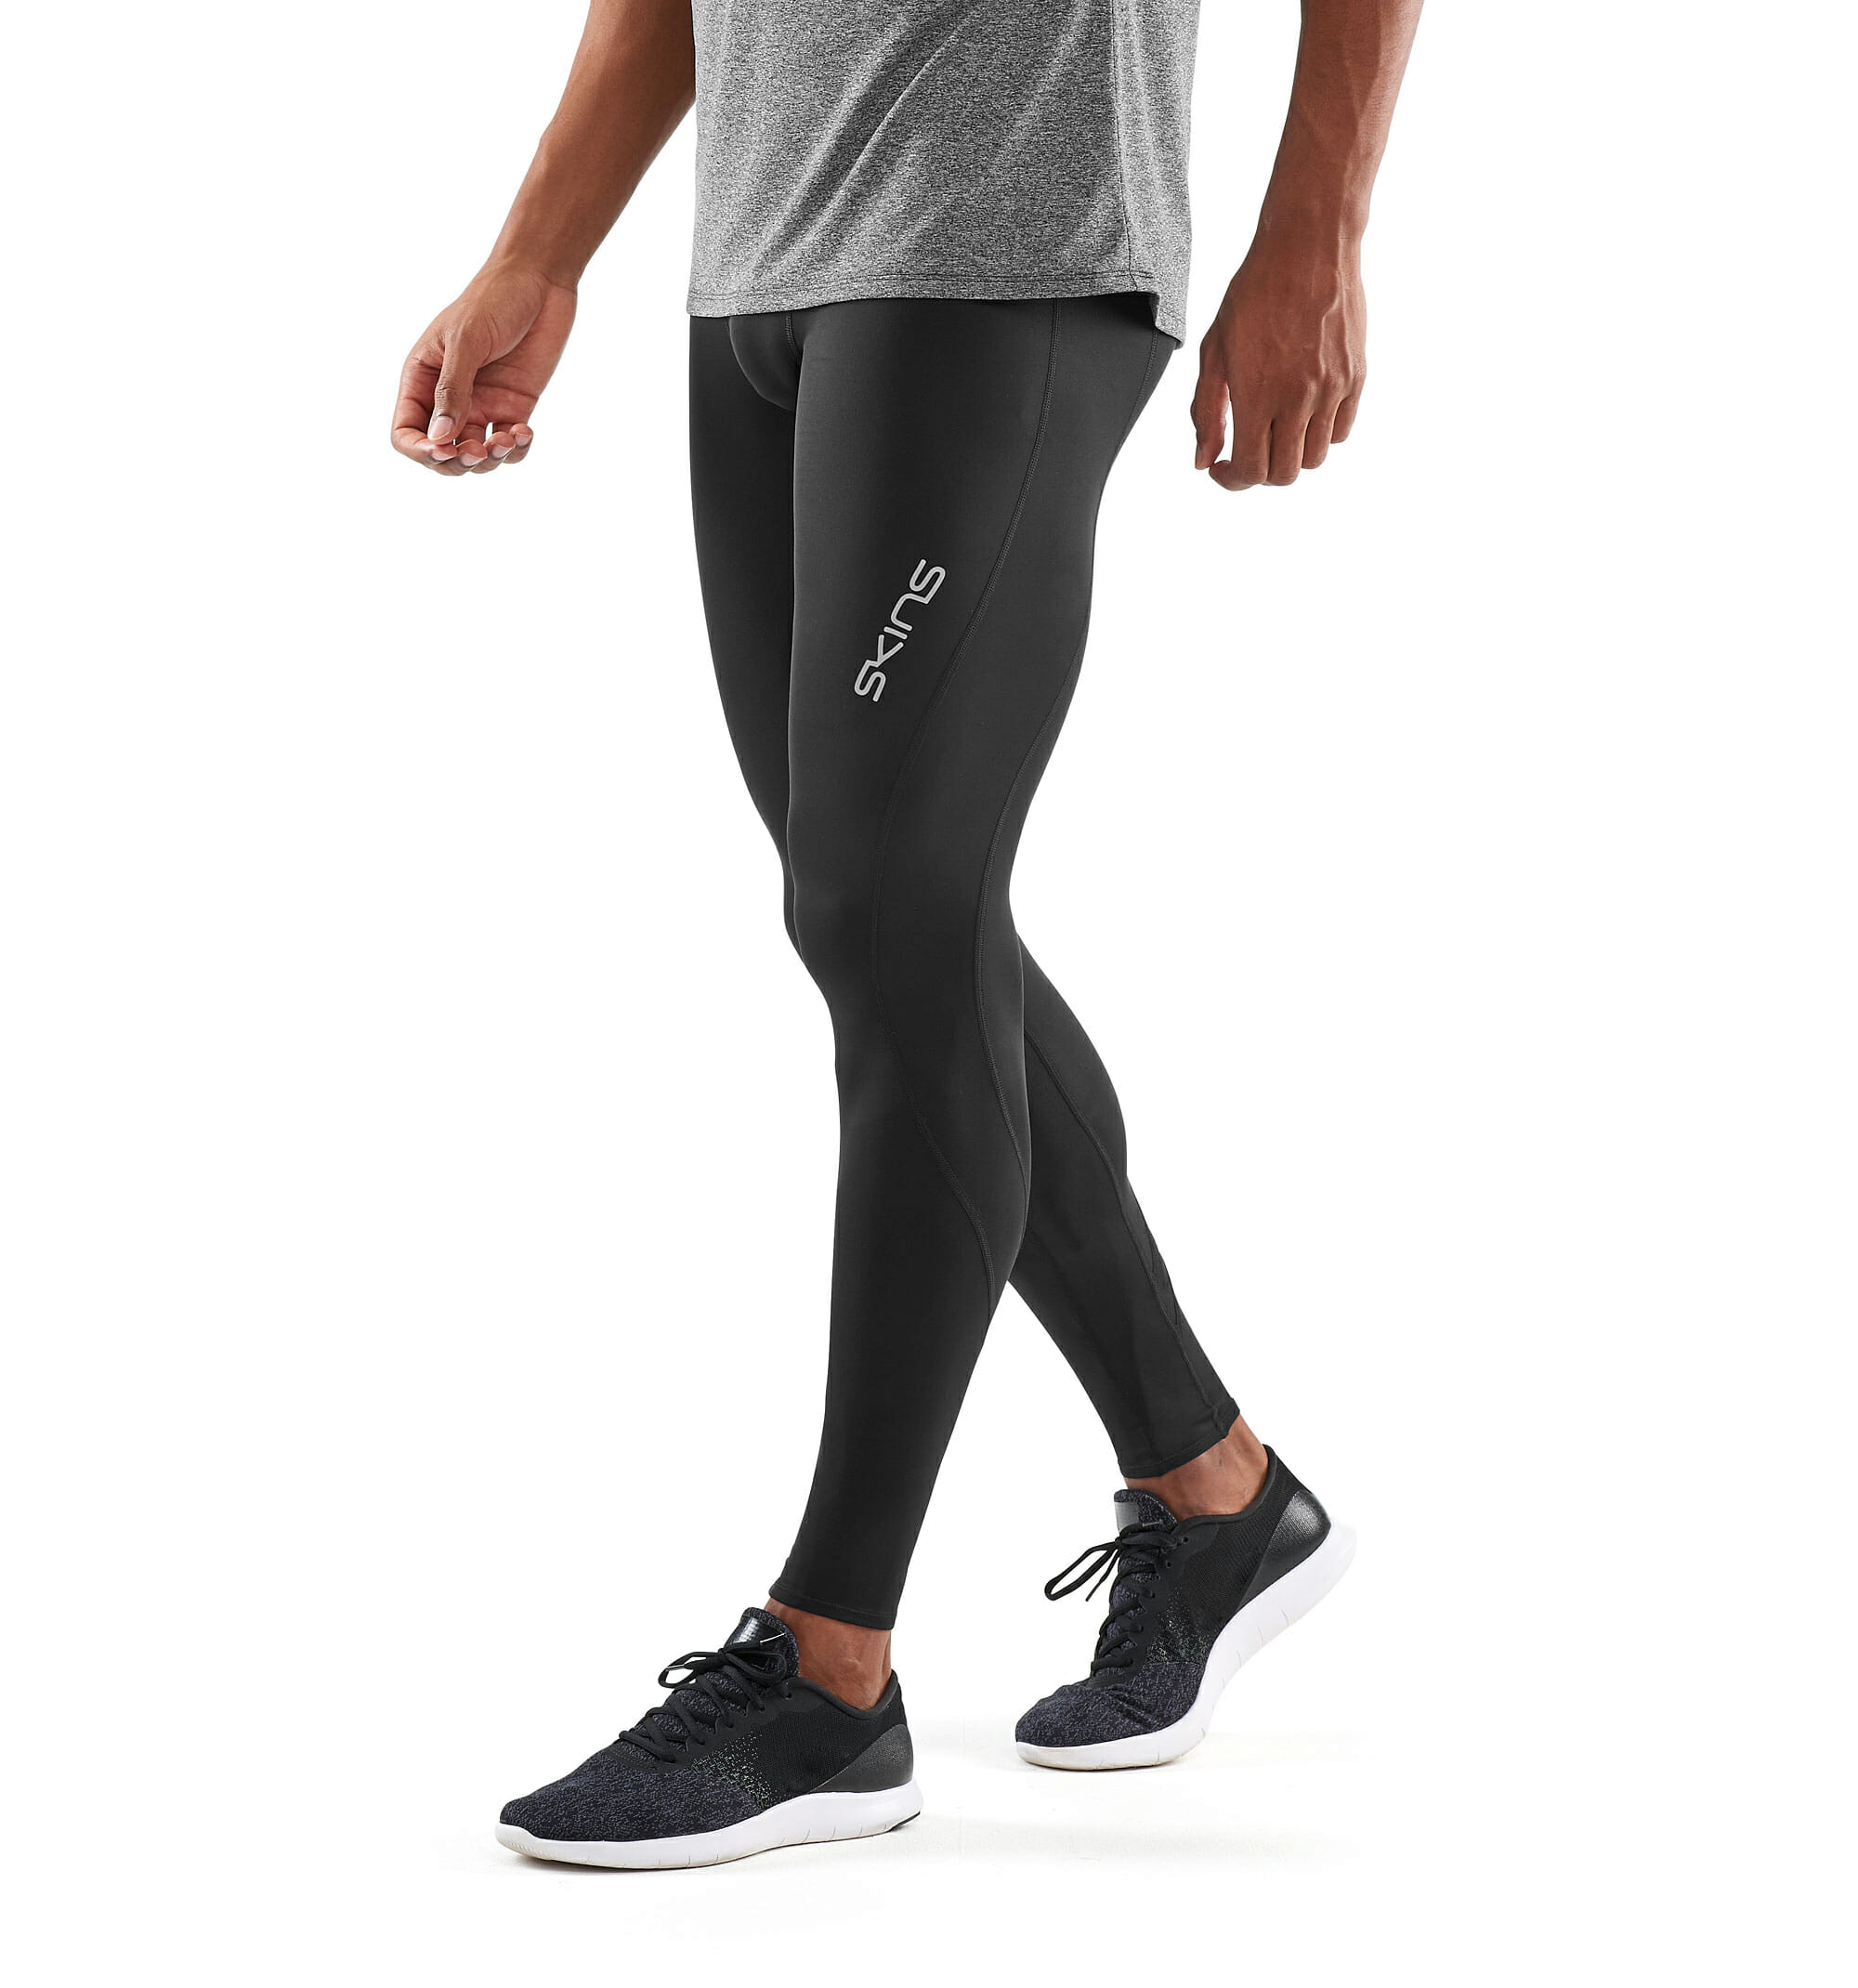 Skins DNAmic Compression Long Tights - Believe in the Run